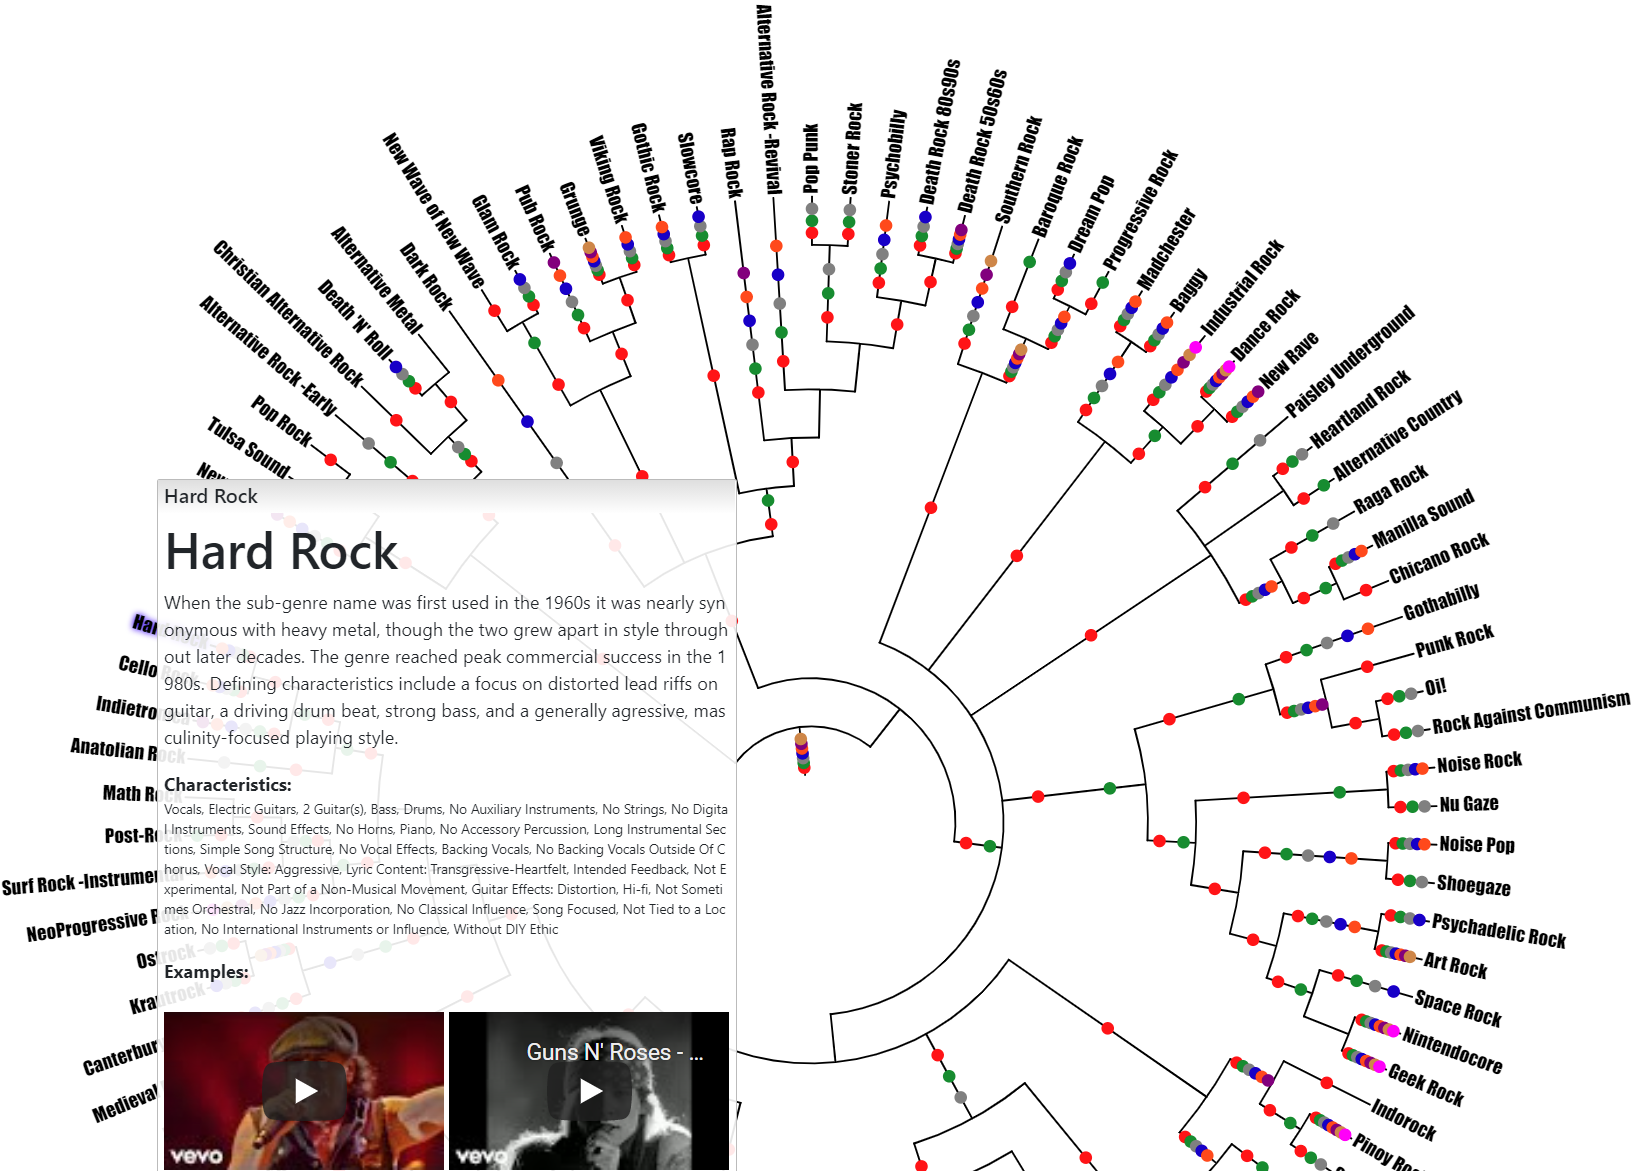 The Evolution of Rock